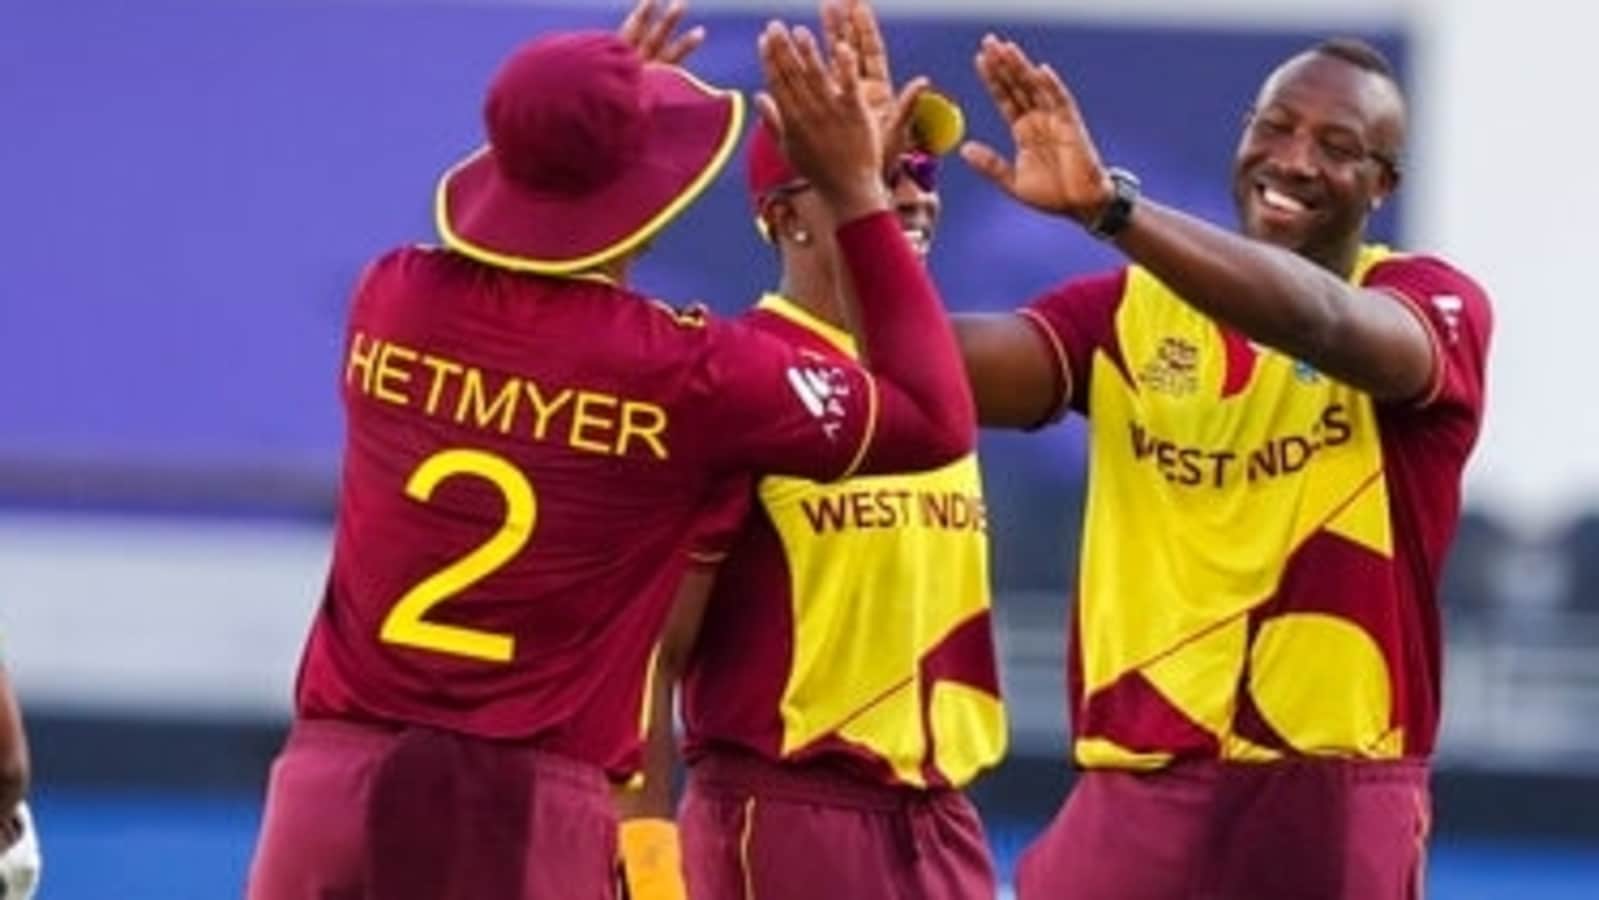 No place for Russell as West Indies announce 15member squad for T20